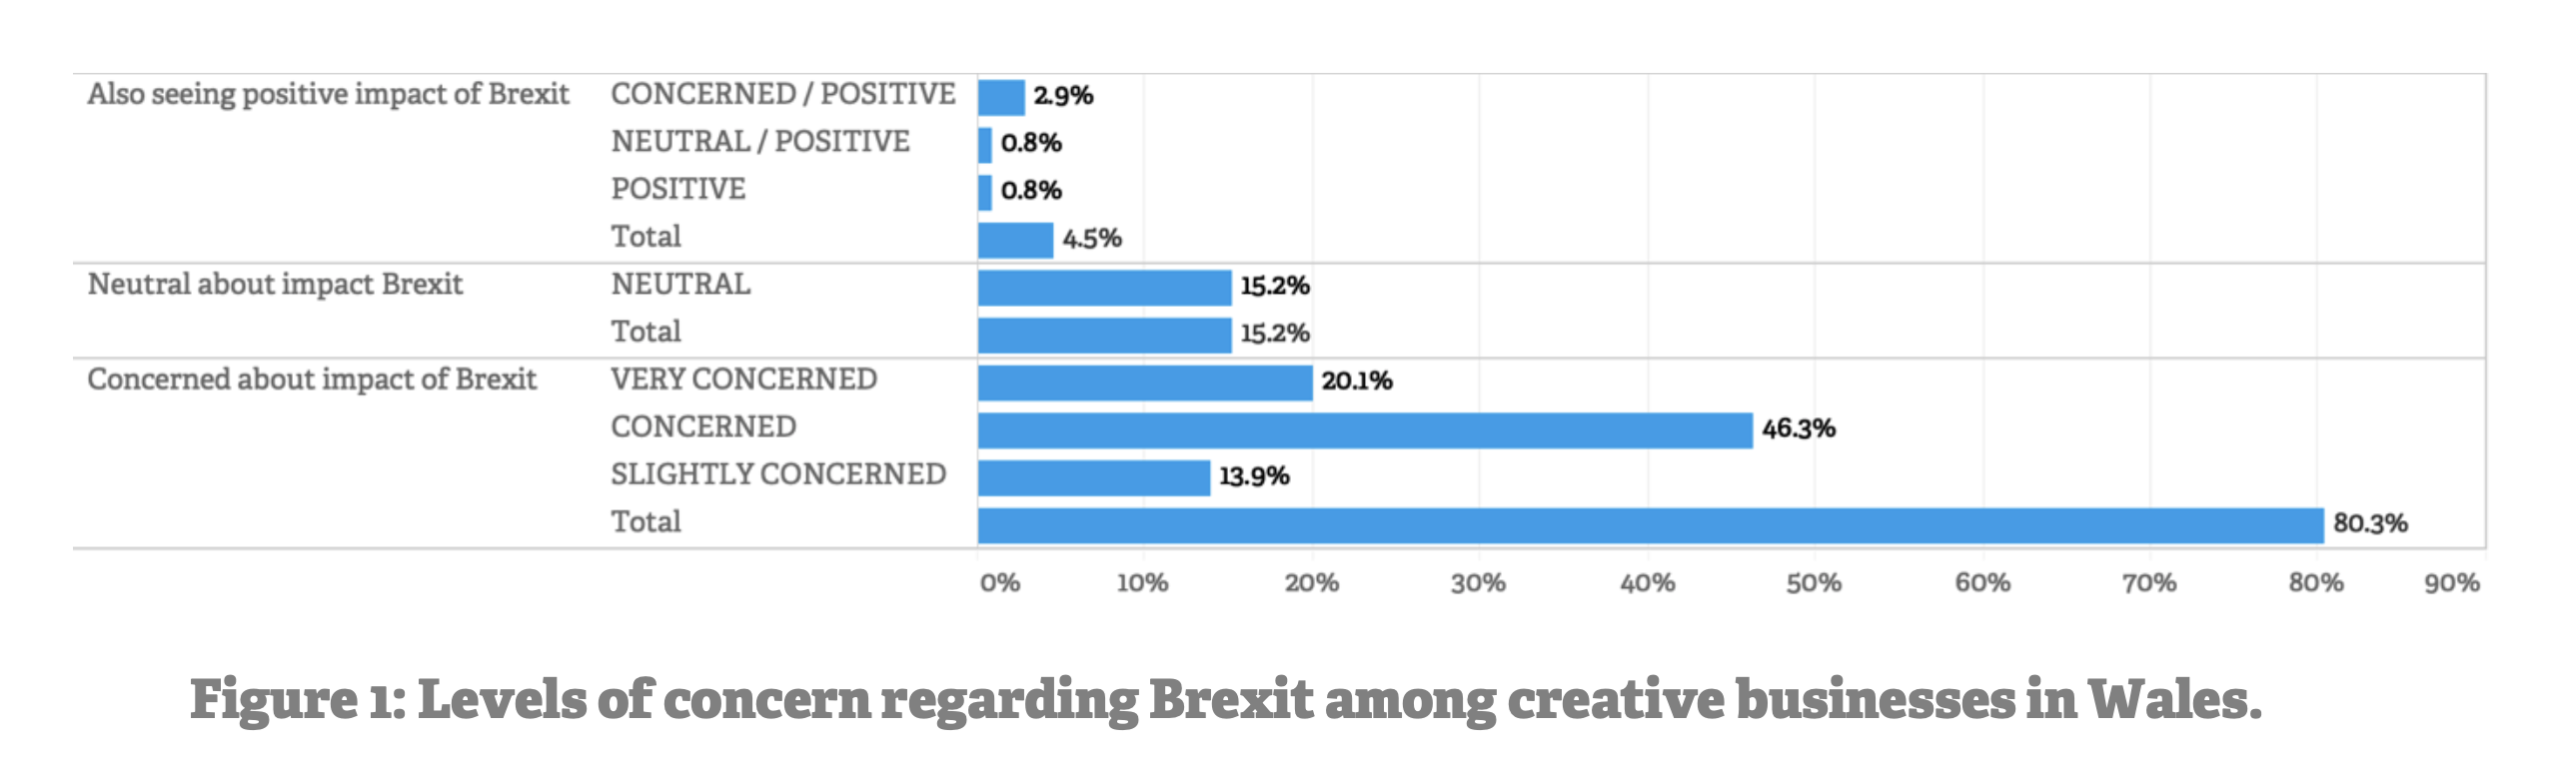 Graph of levels of concern regarding Brexit among creative businesses in Wales.